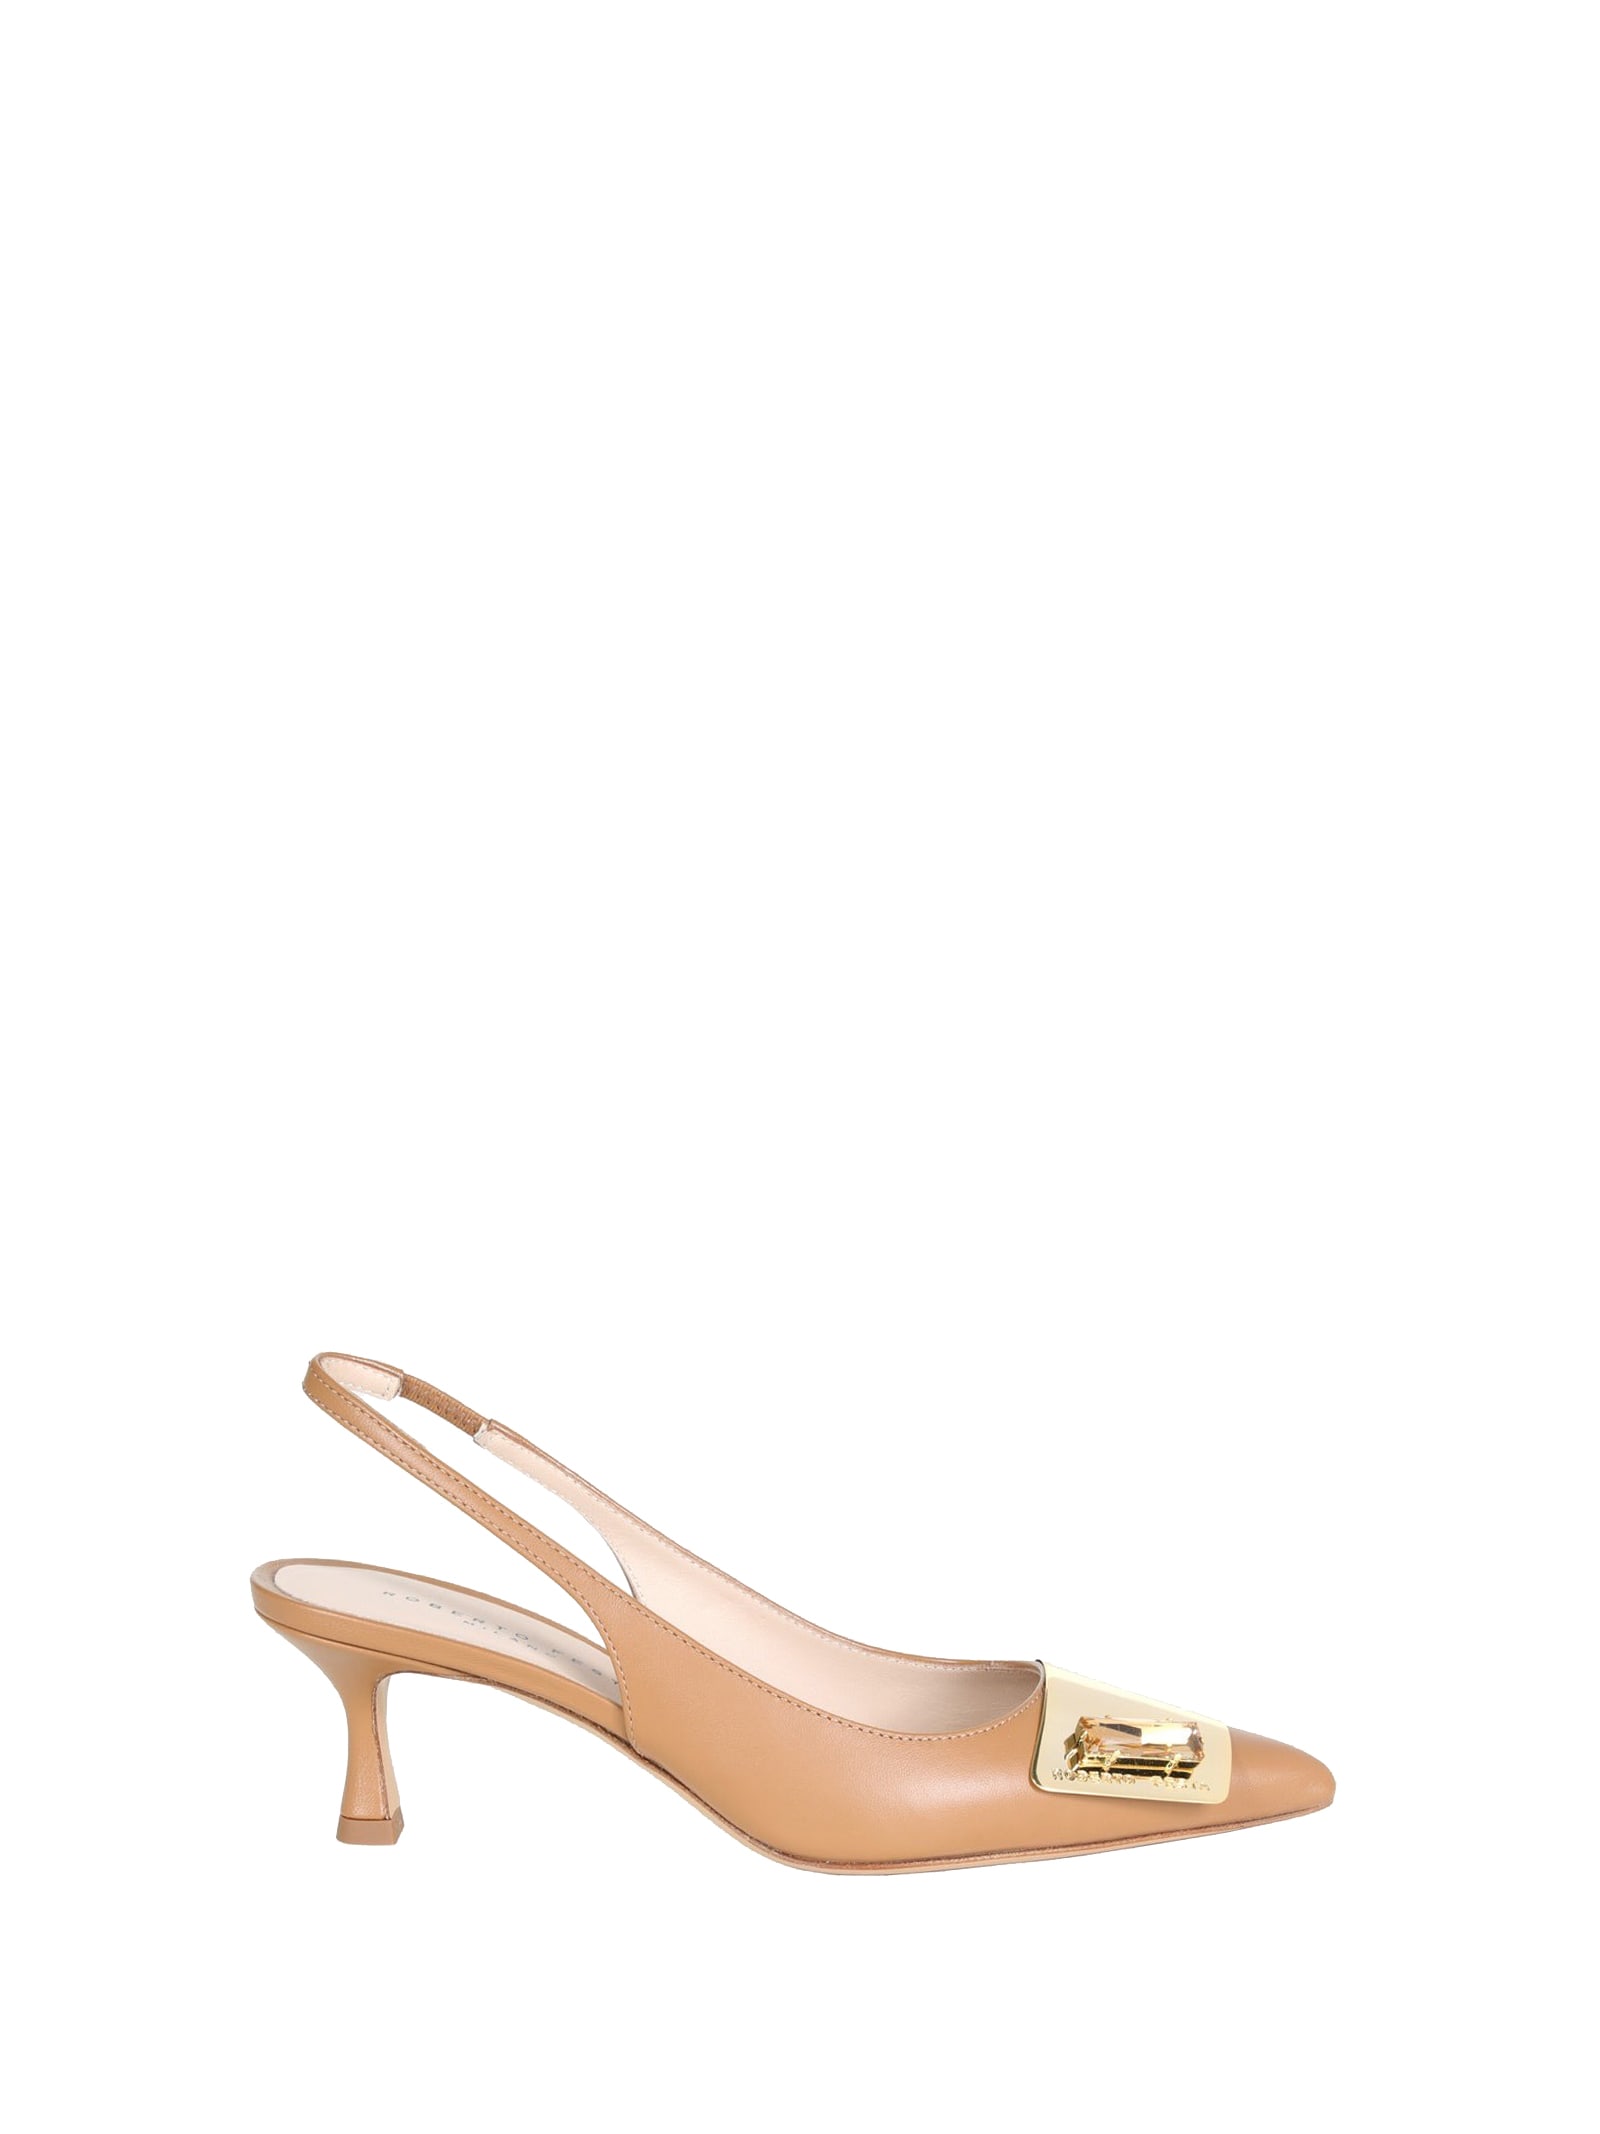 Roberto Festa Chanel Slingback In Softy Camel With Plaque Accessory